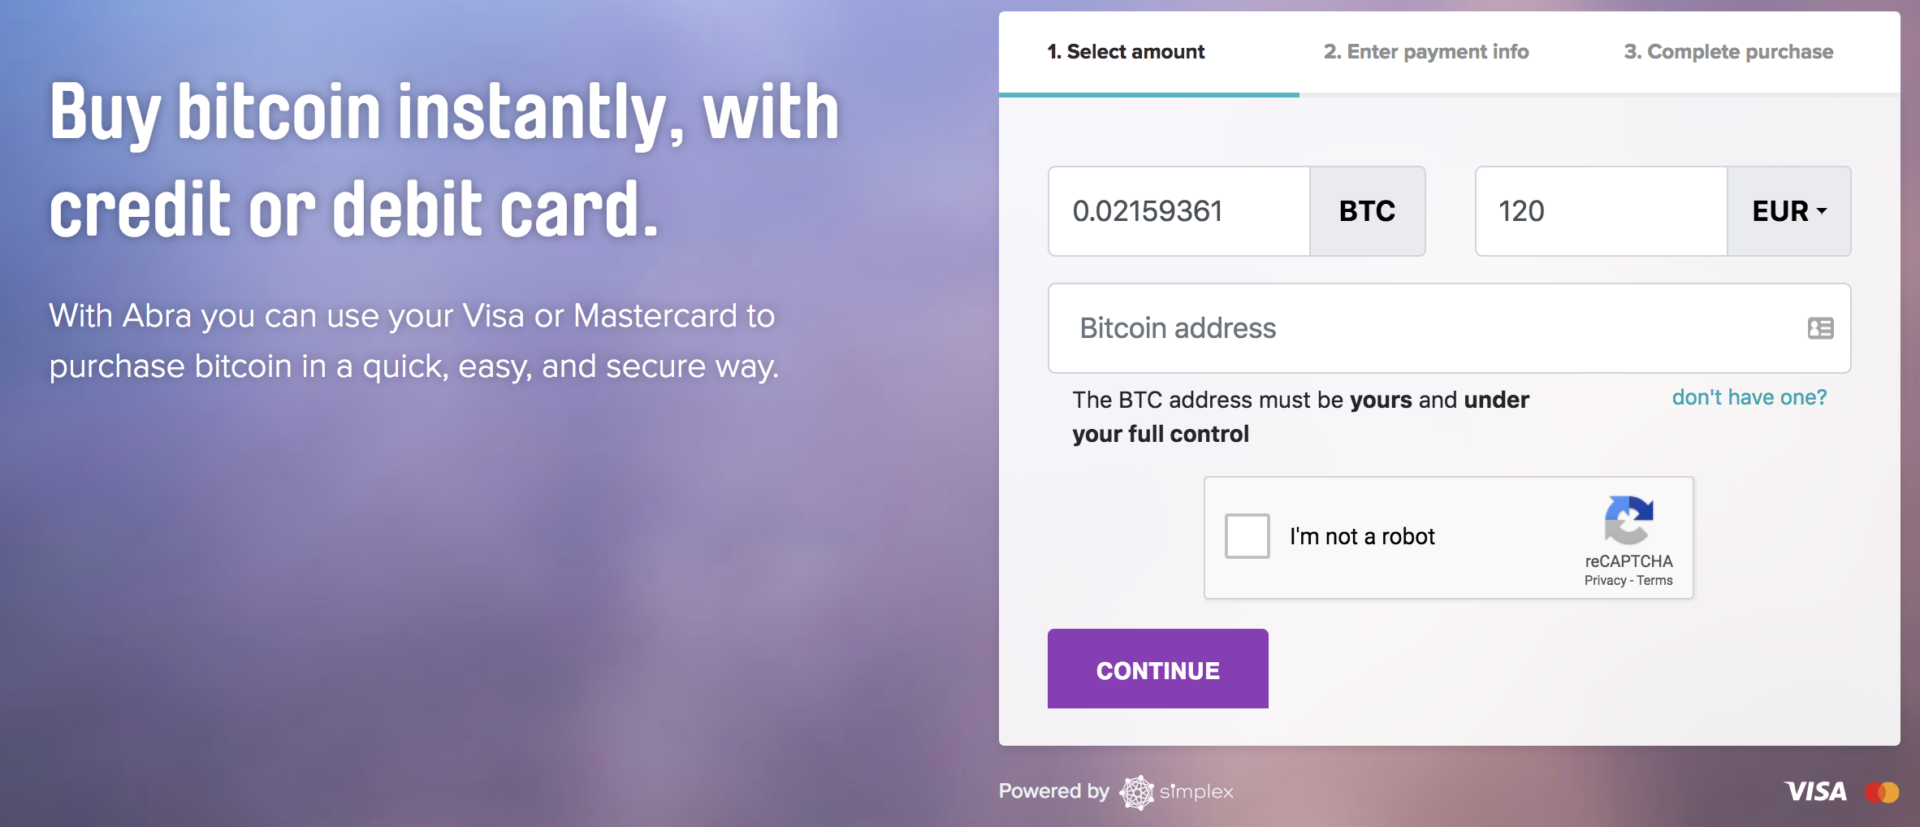 Bitcoin Purchase with Credit/Debit Cards on Abra 10